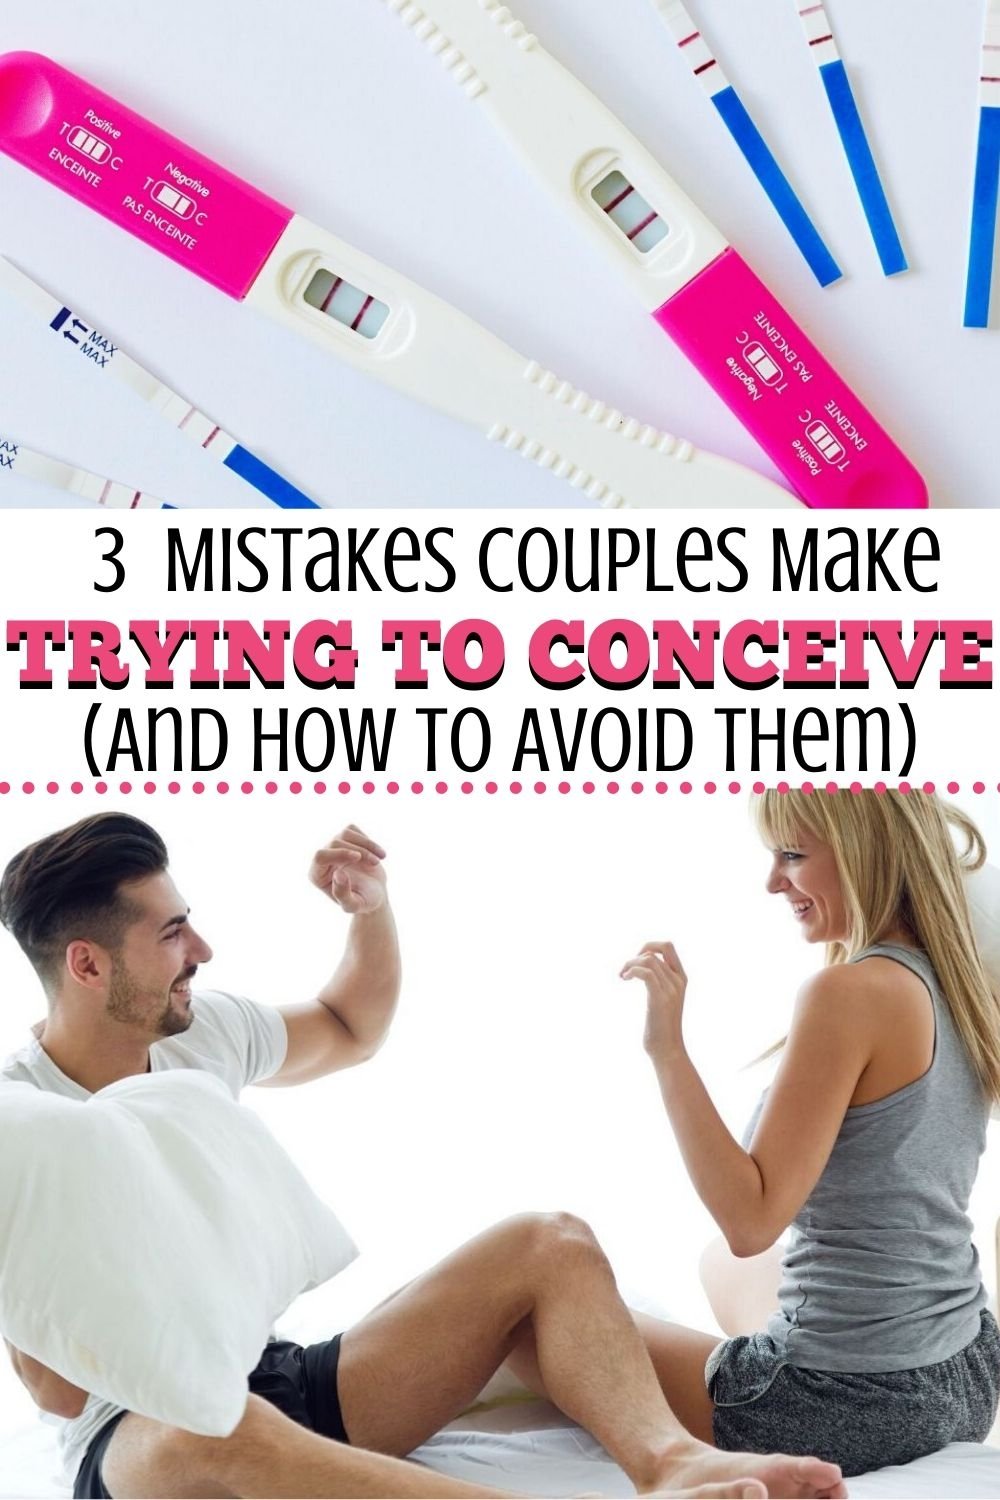 3 Common Trying To Conceive Mistakes (And How To Avoid Them)